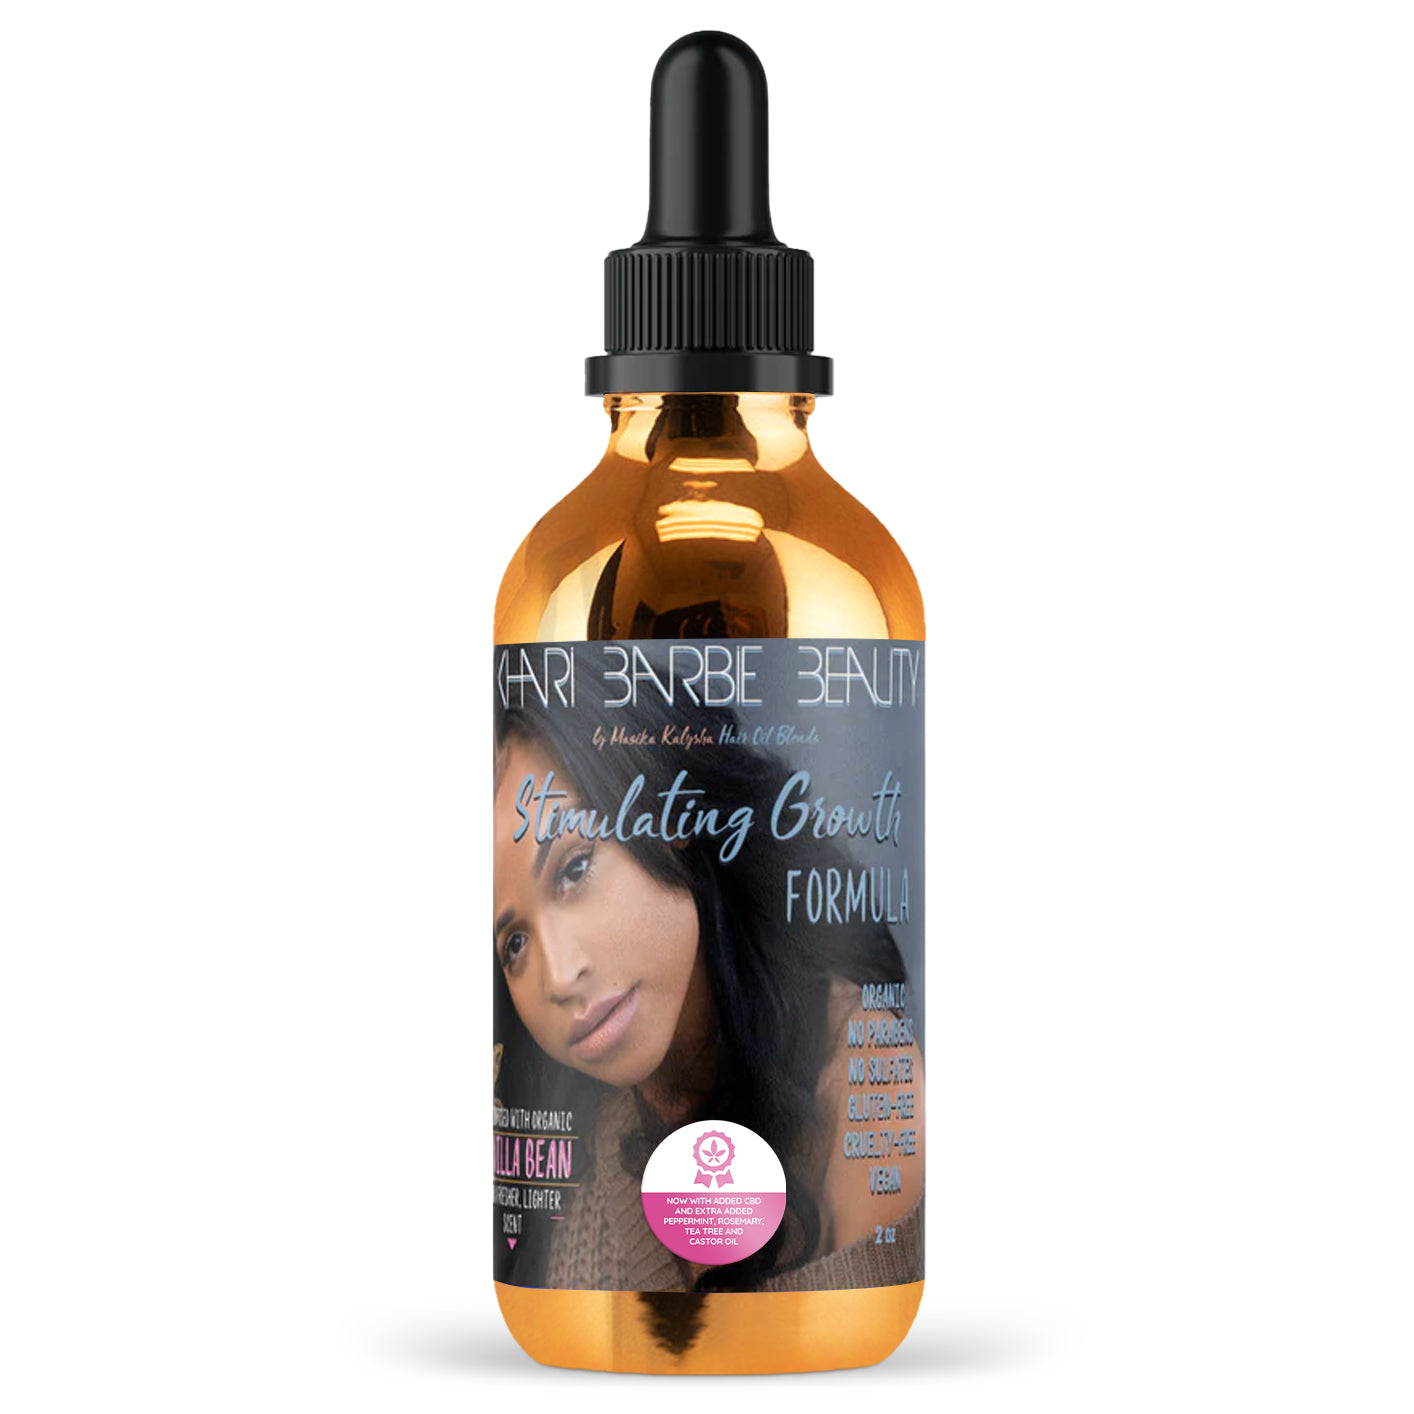 Stimulating Growth Hair Oil with CBD by Khari Barbie Beauty